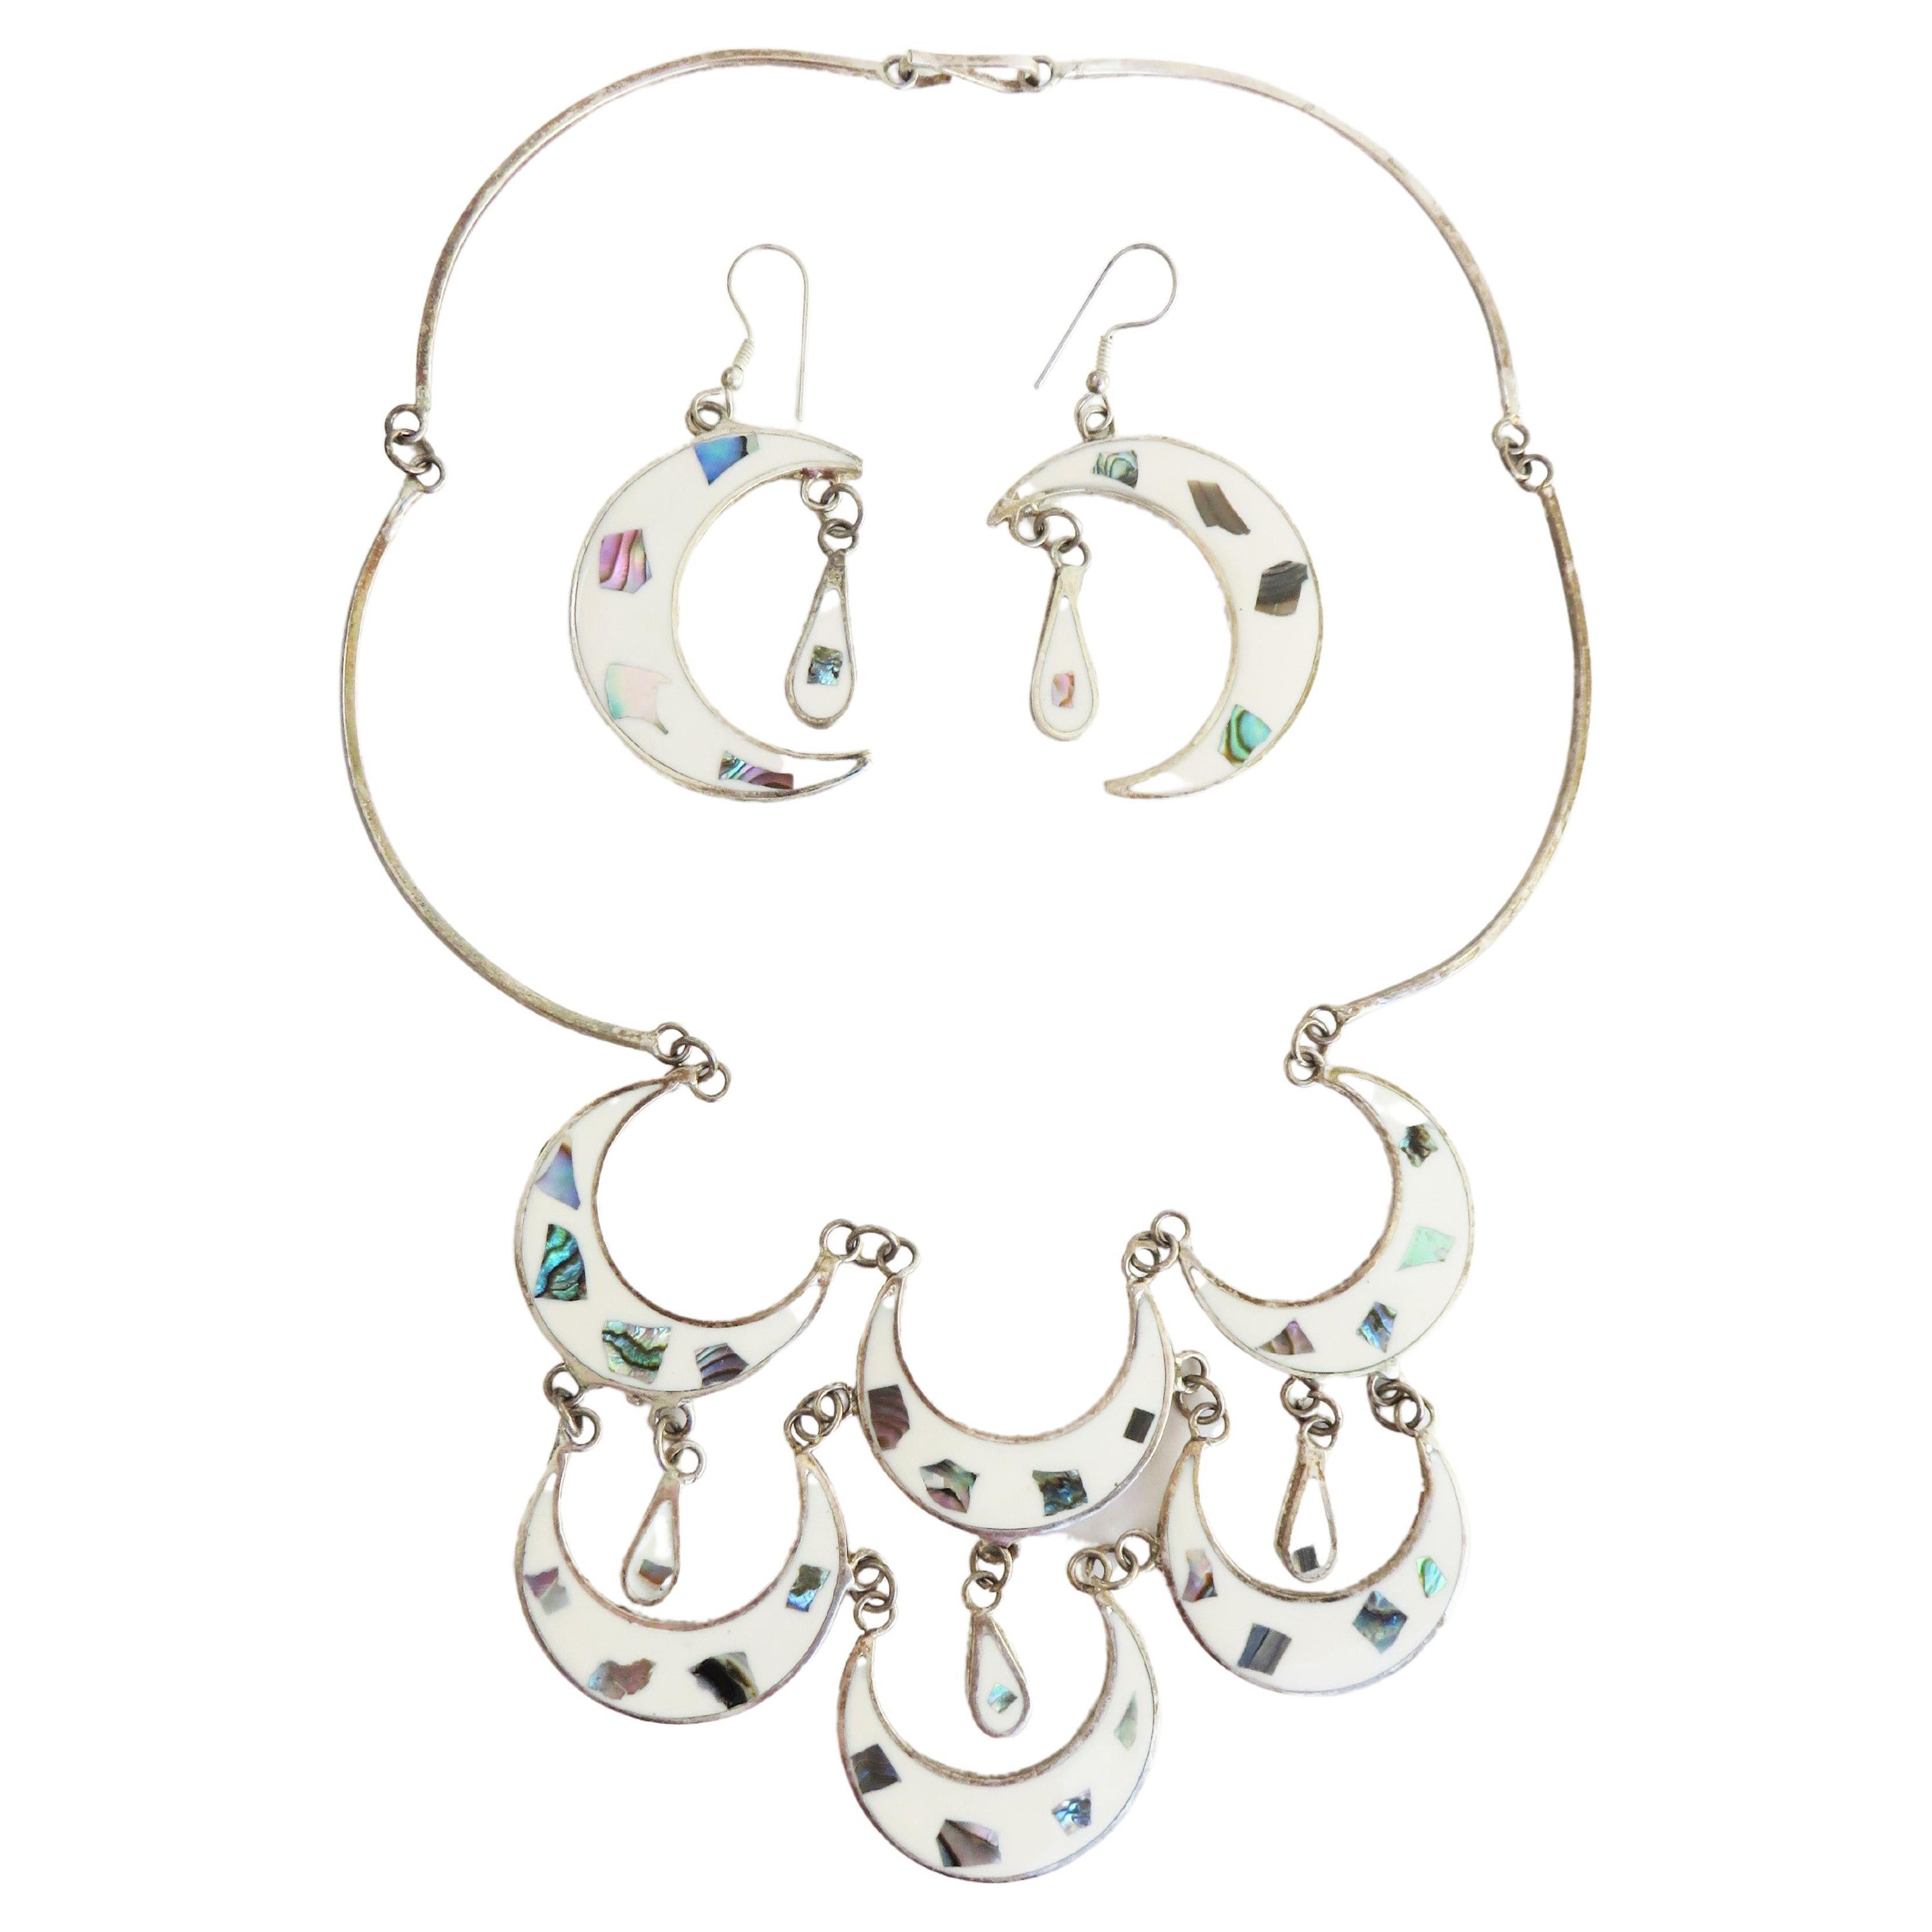 Mexican Abalone Inlaid Silver Necklace and Pierced Earrings Set For Sale